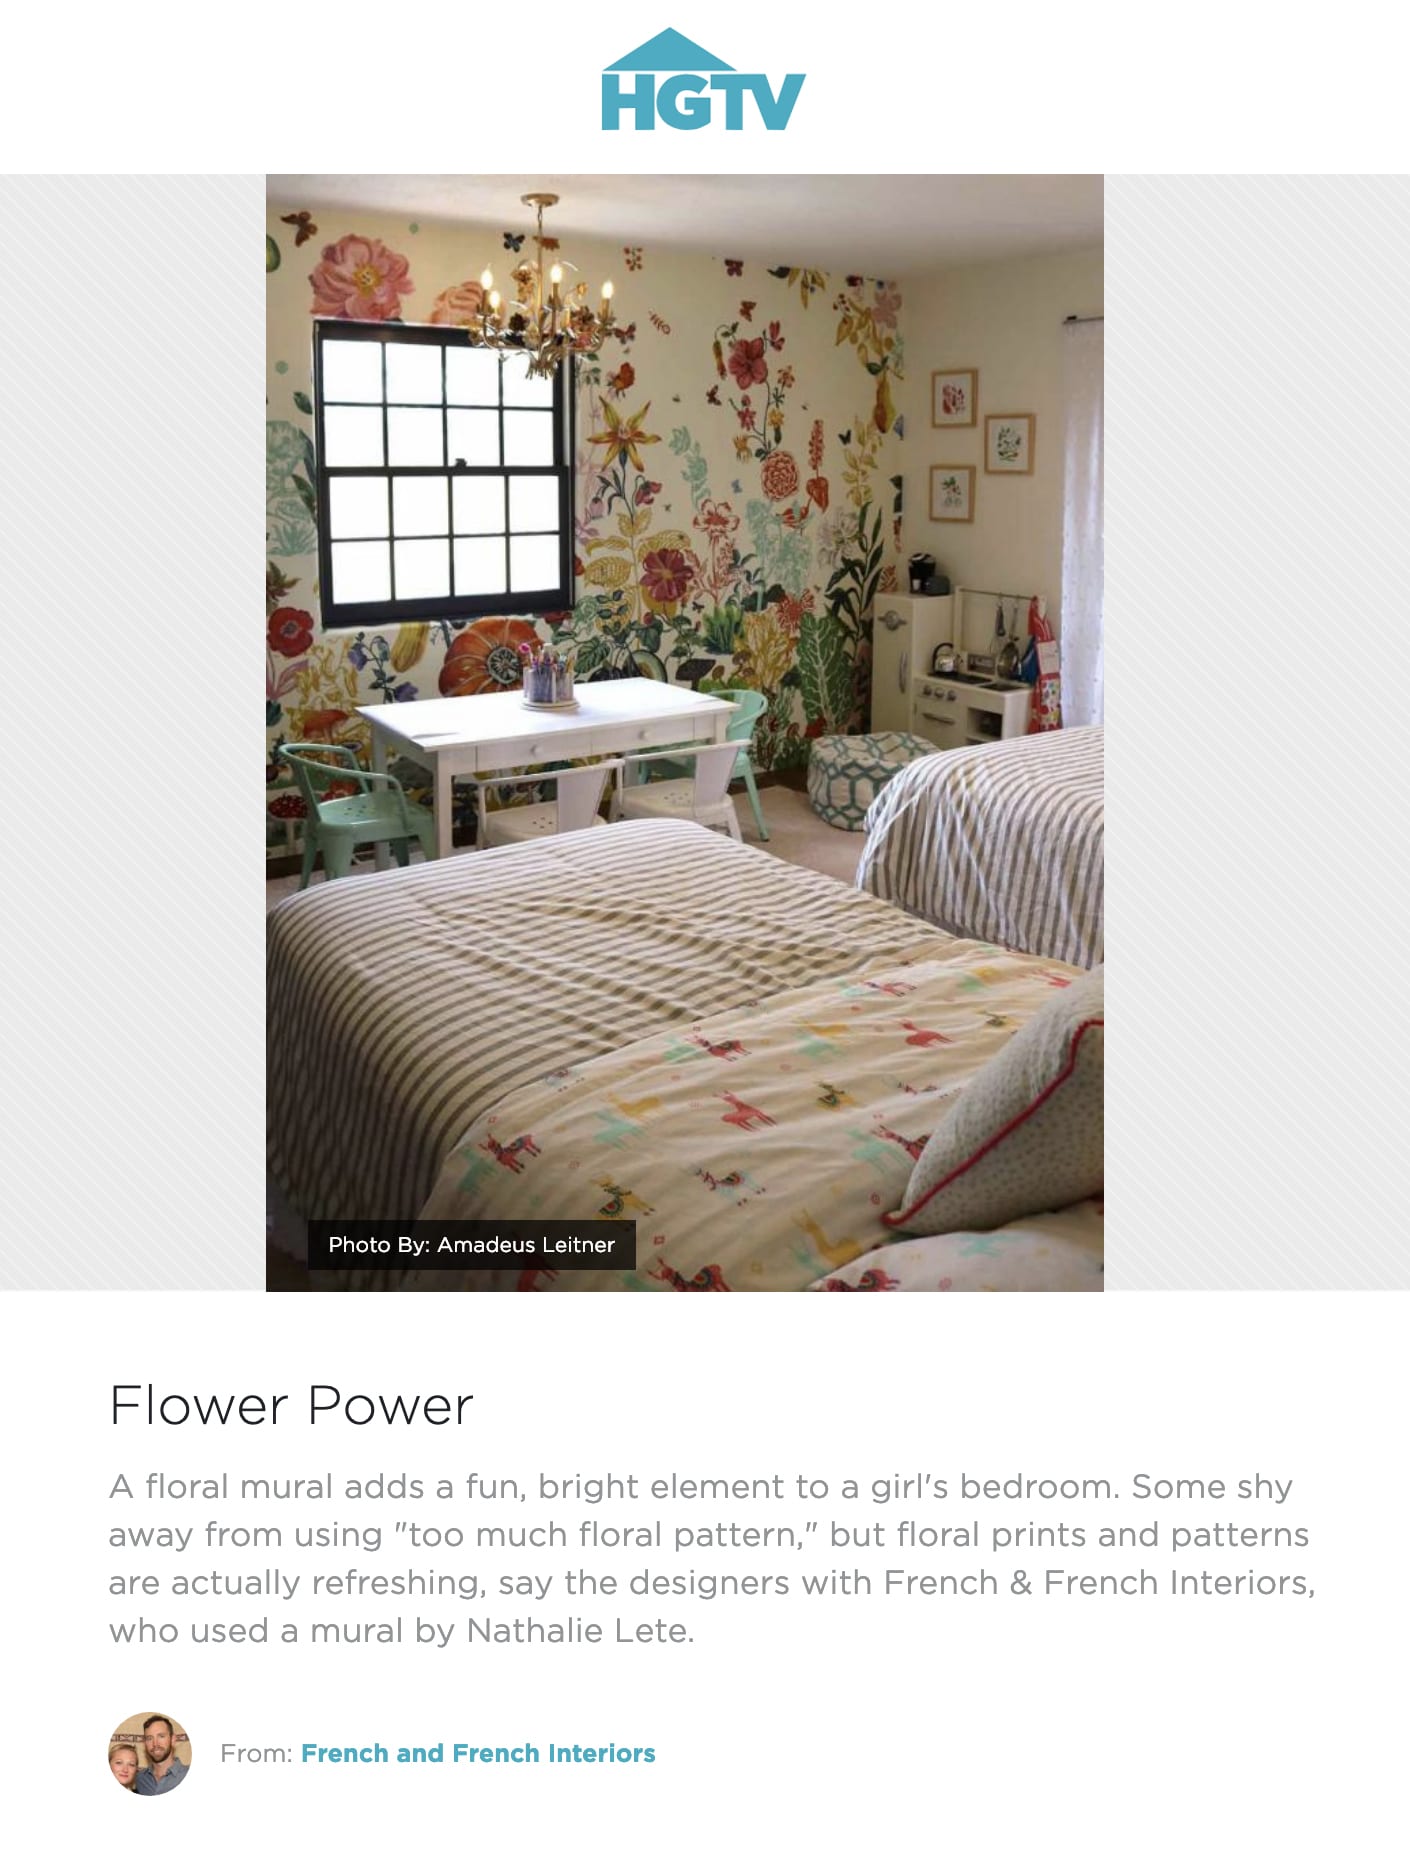 flower power hgtv article featuring french and french interiors